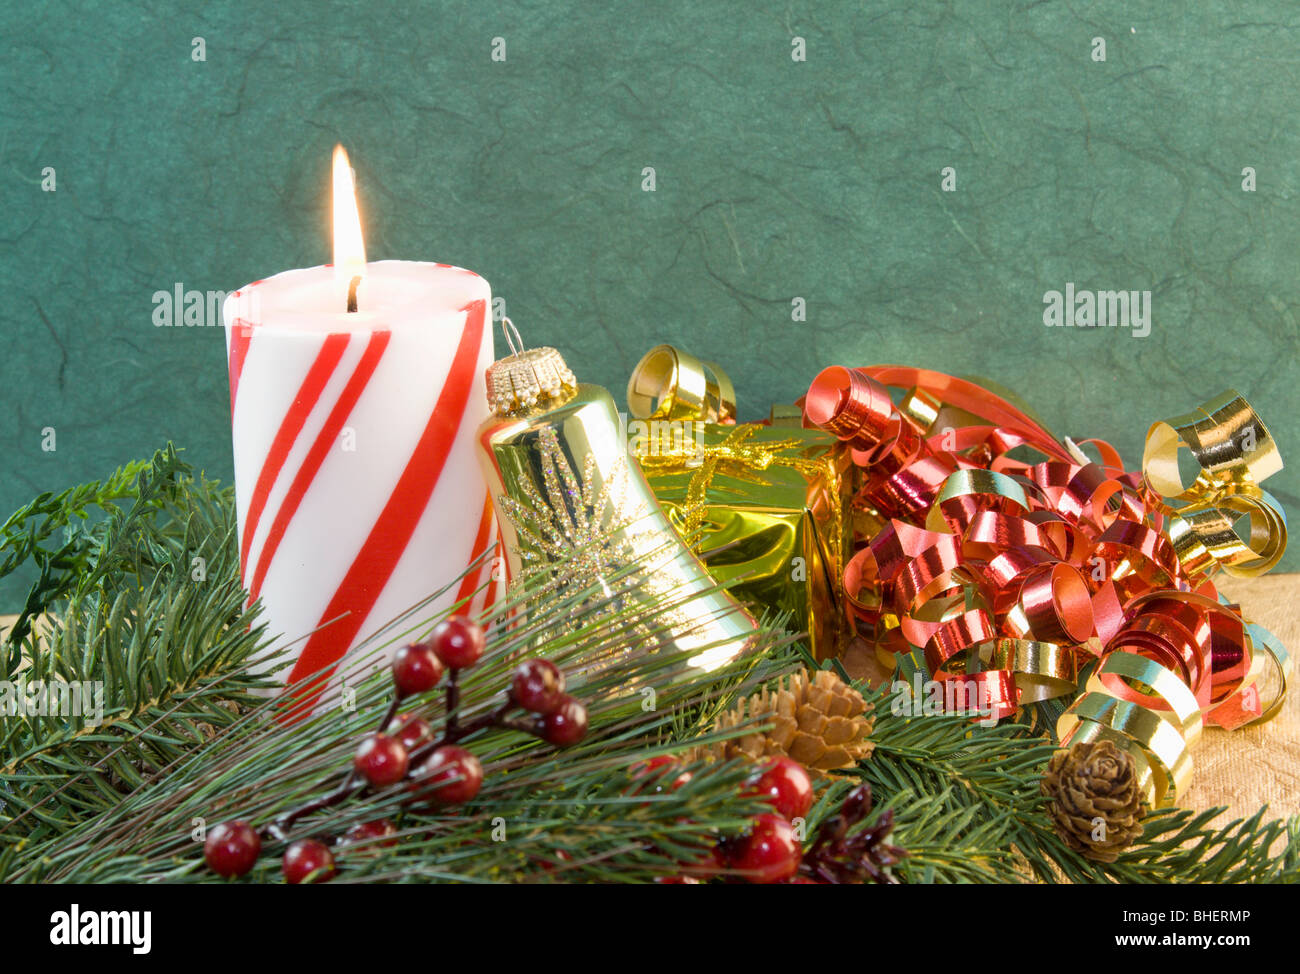 red and white striped Christmas candle with gold bell ornament and red curly ribbon Stock Photo